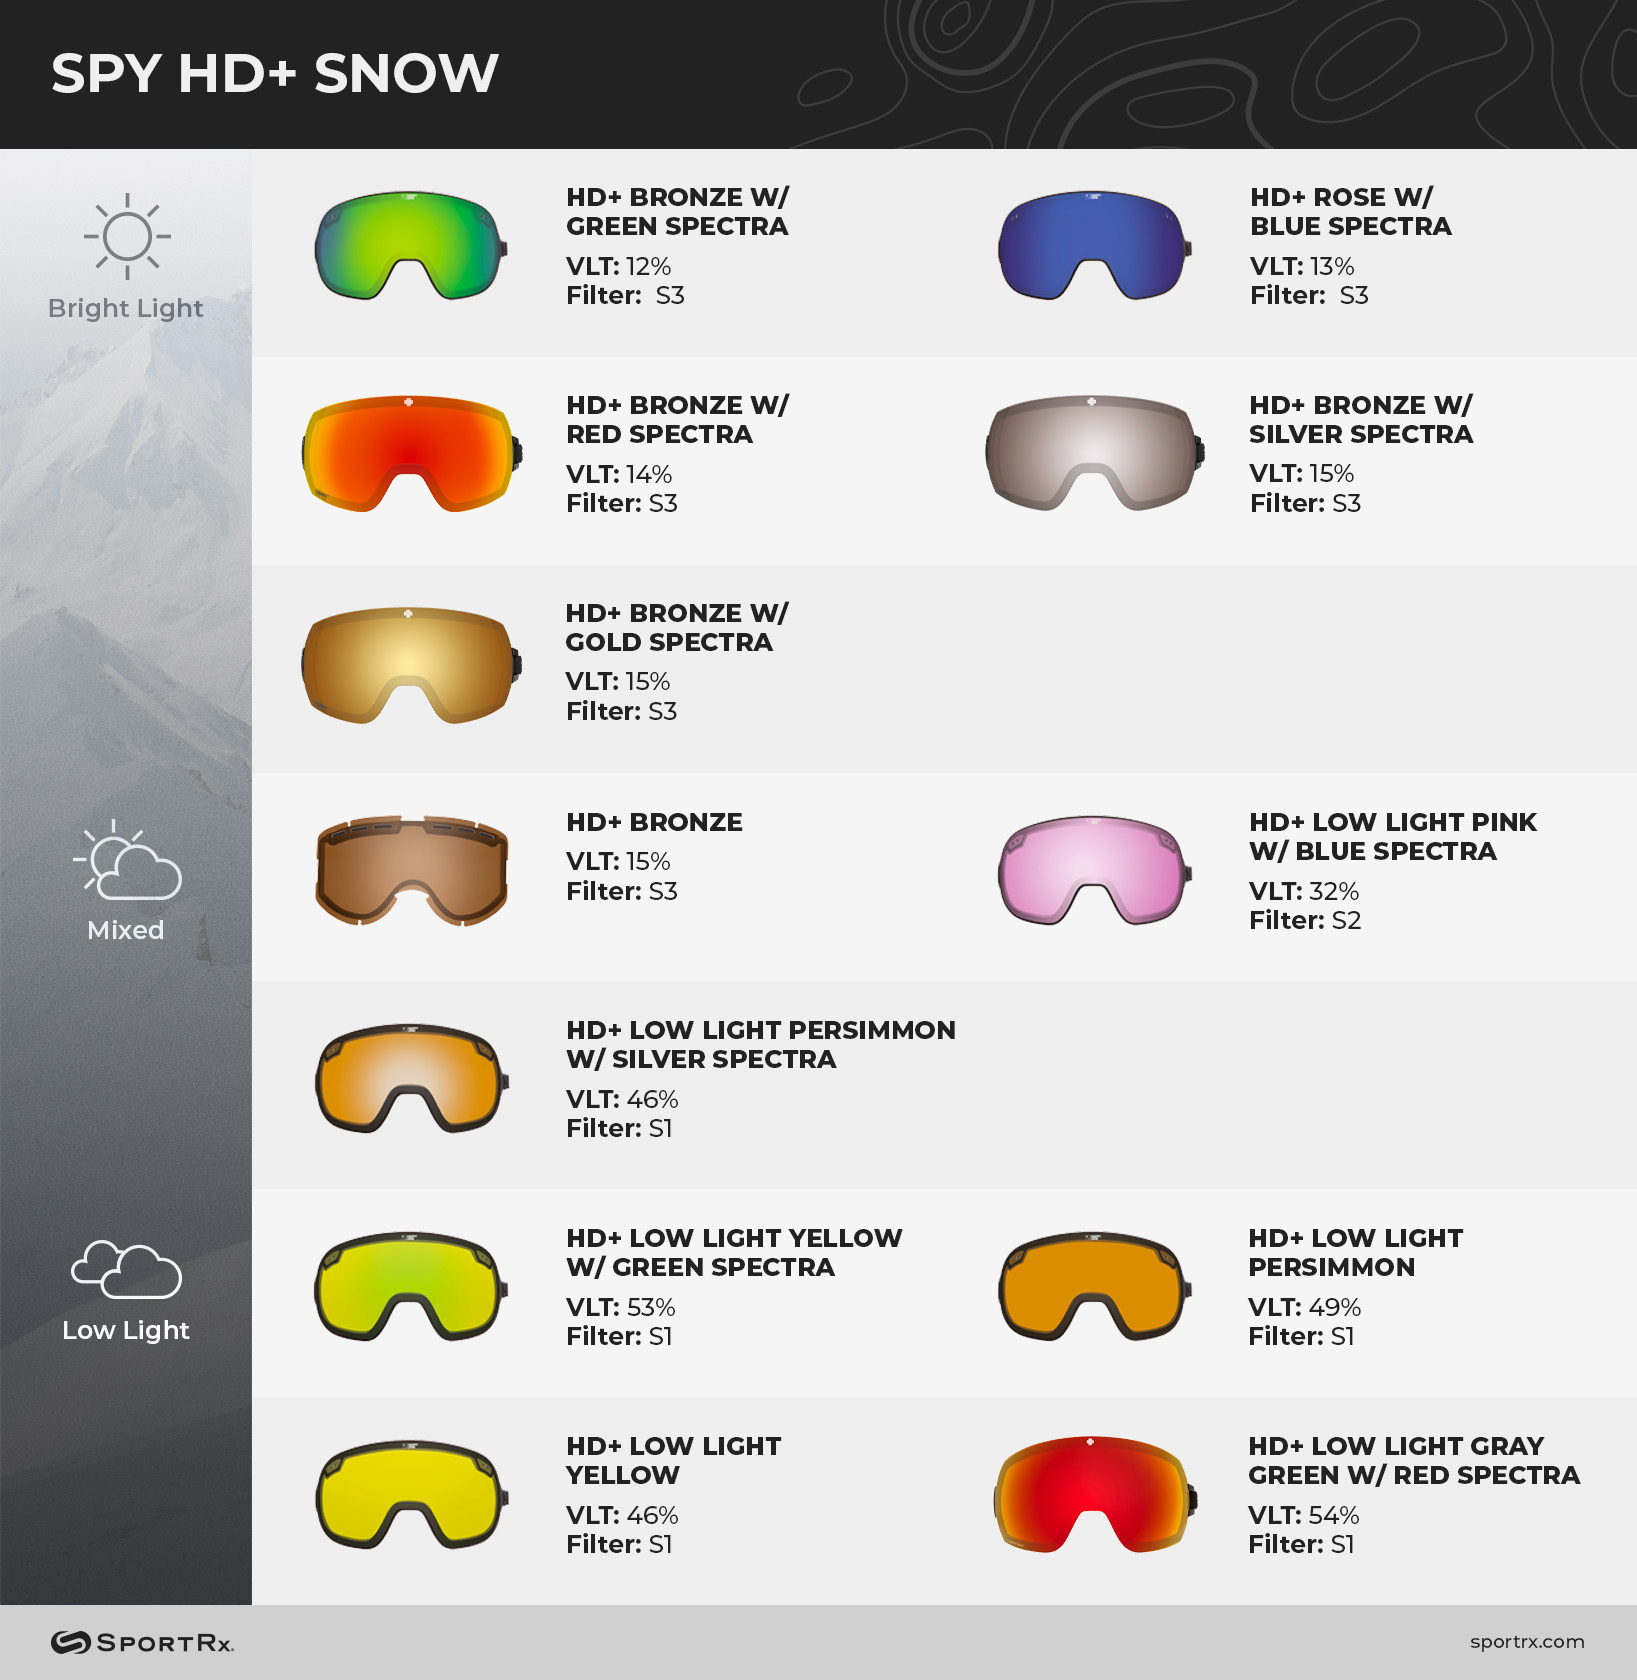 spy hd snow goggle lens chart with snowboarding lenses for bright light everyday light conditions and low light skiing weather